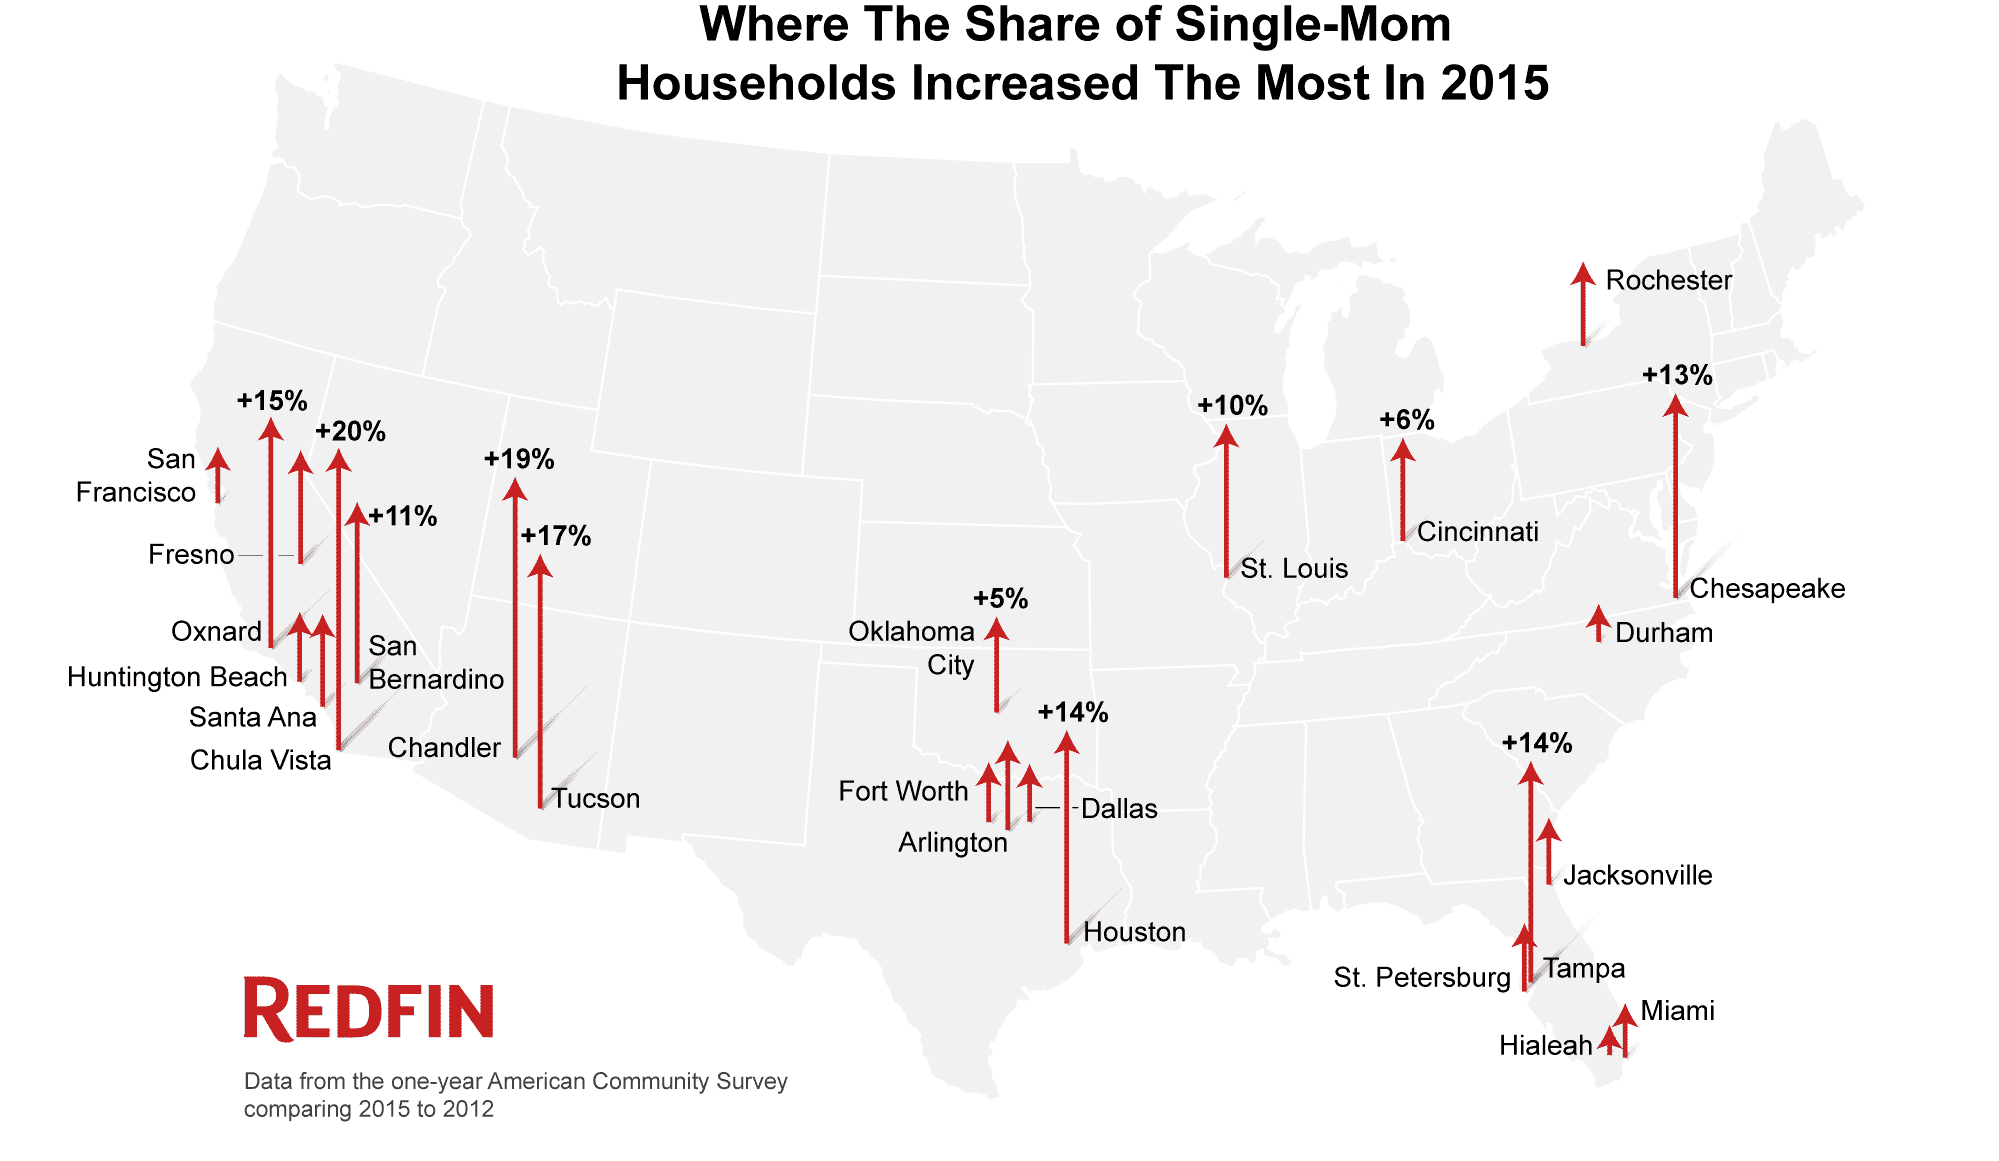 Map: arrow length shows the increase in the share of single-mom households in 2015, compared with the rate in 2012 for each city.